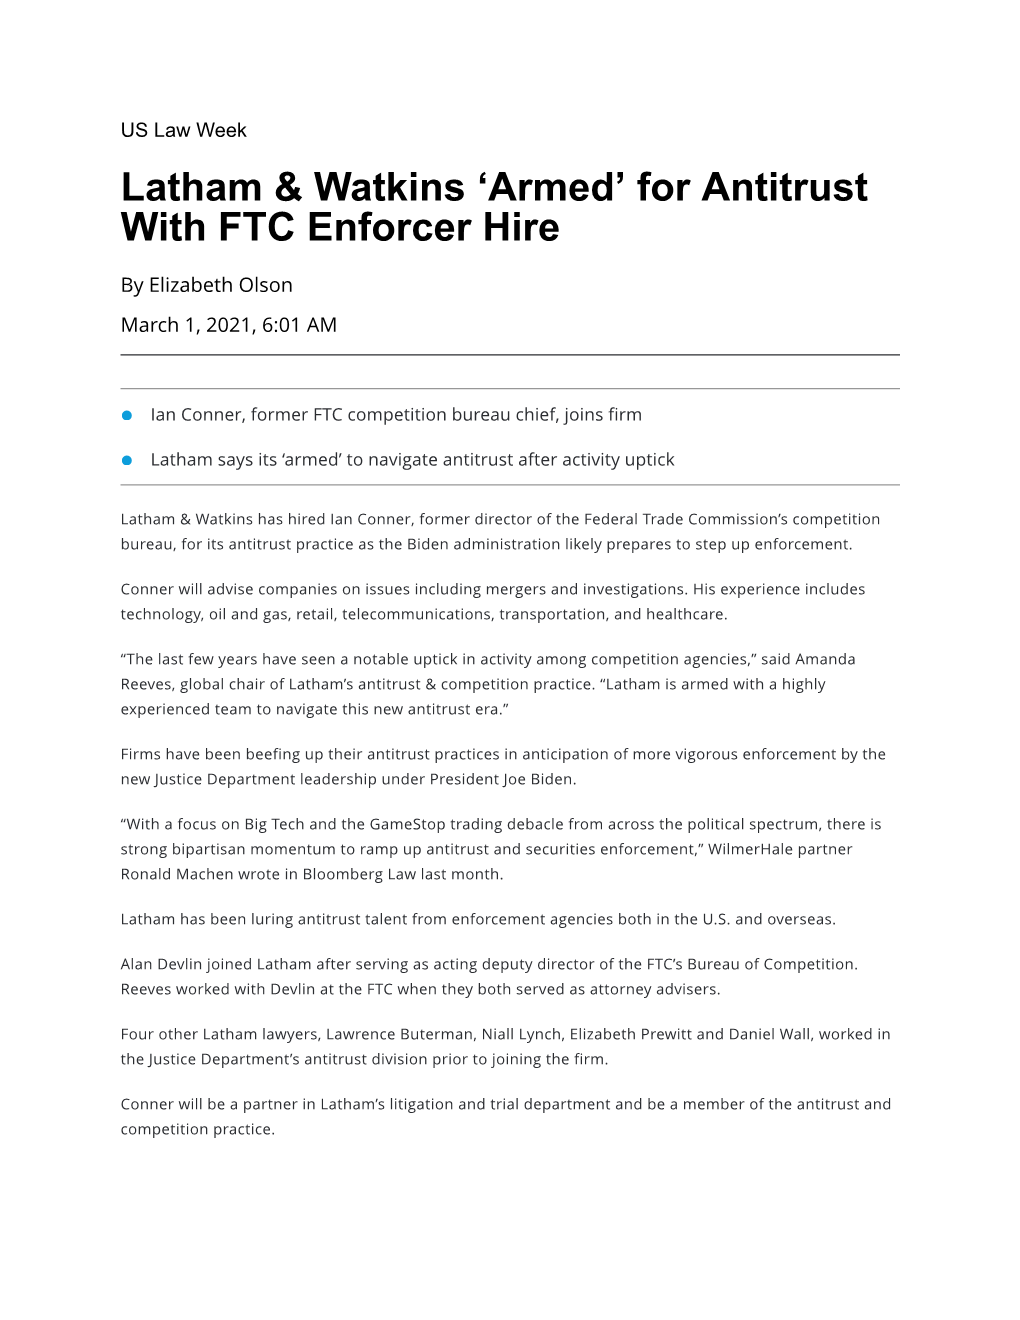 Latham & Watkins 'Armed' for Antitrust with FTC Enforcer Hire